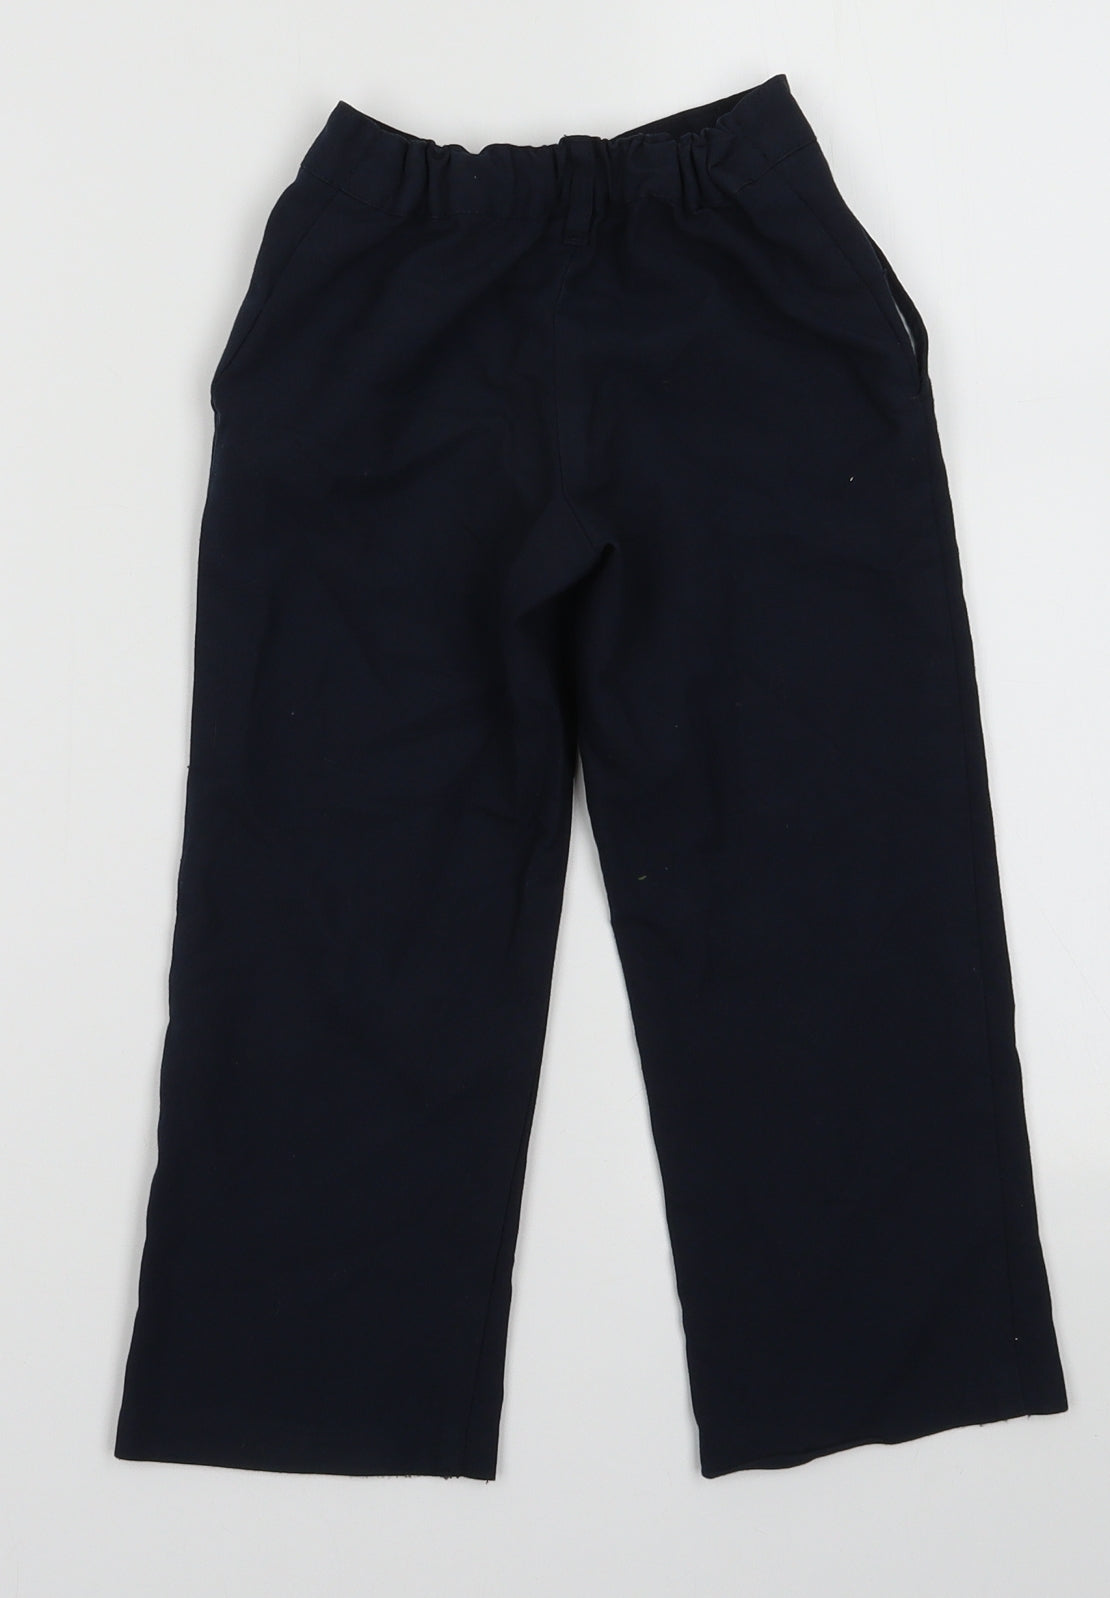 Marks and Spencer Boys Blue  Polyester Capri Trousers Size 2-3 Years  Regular